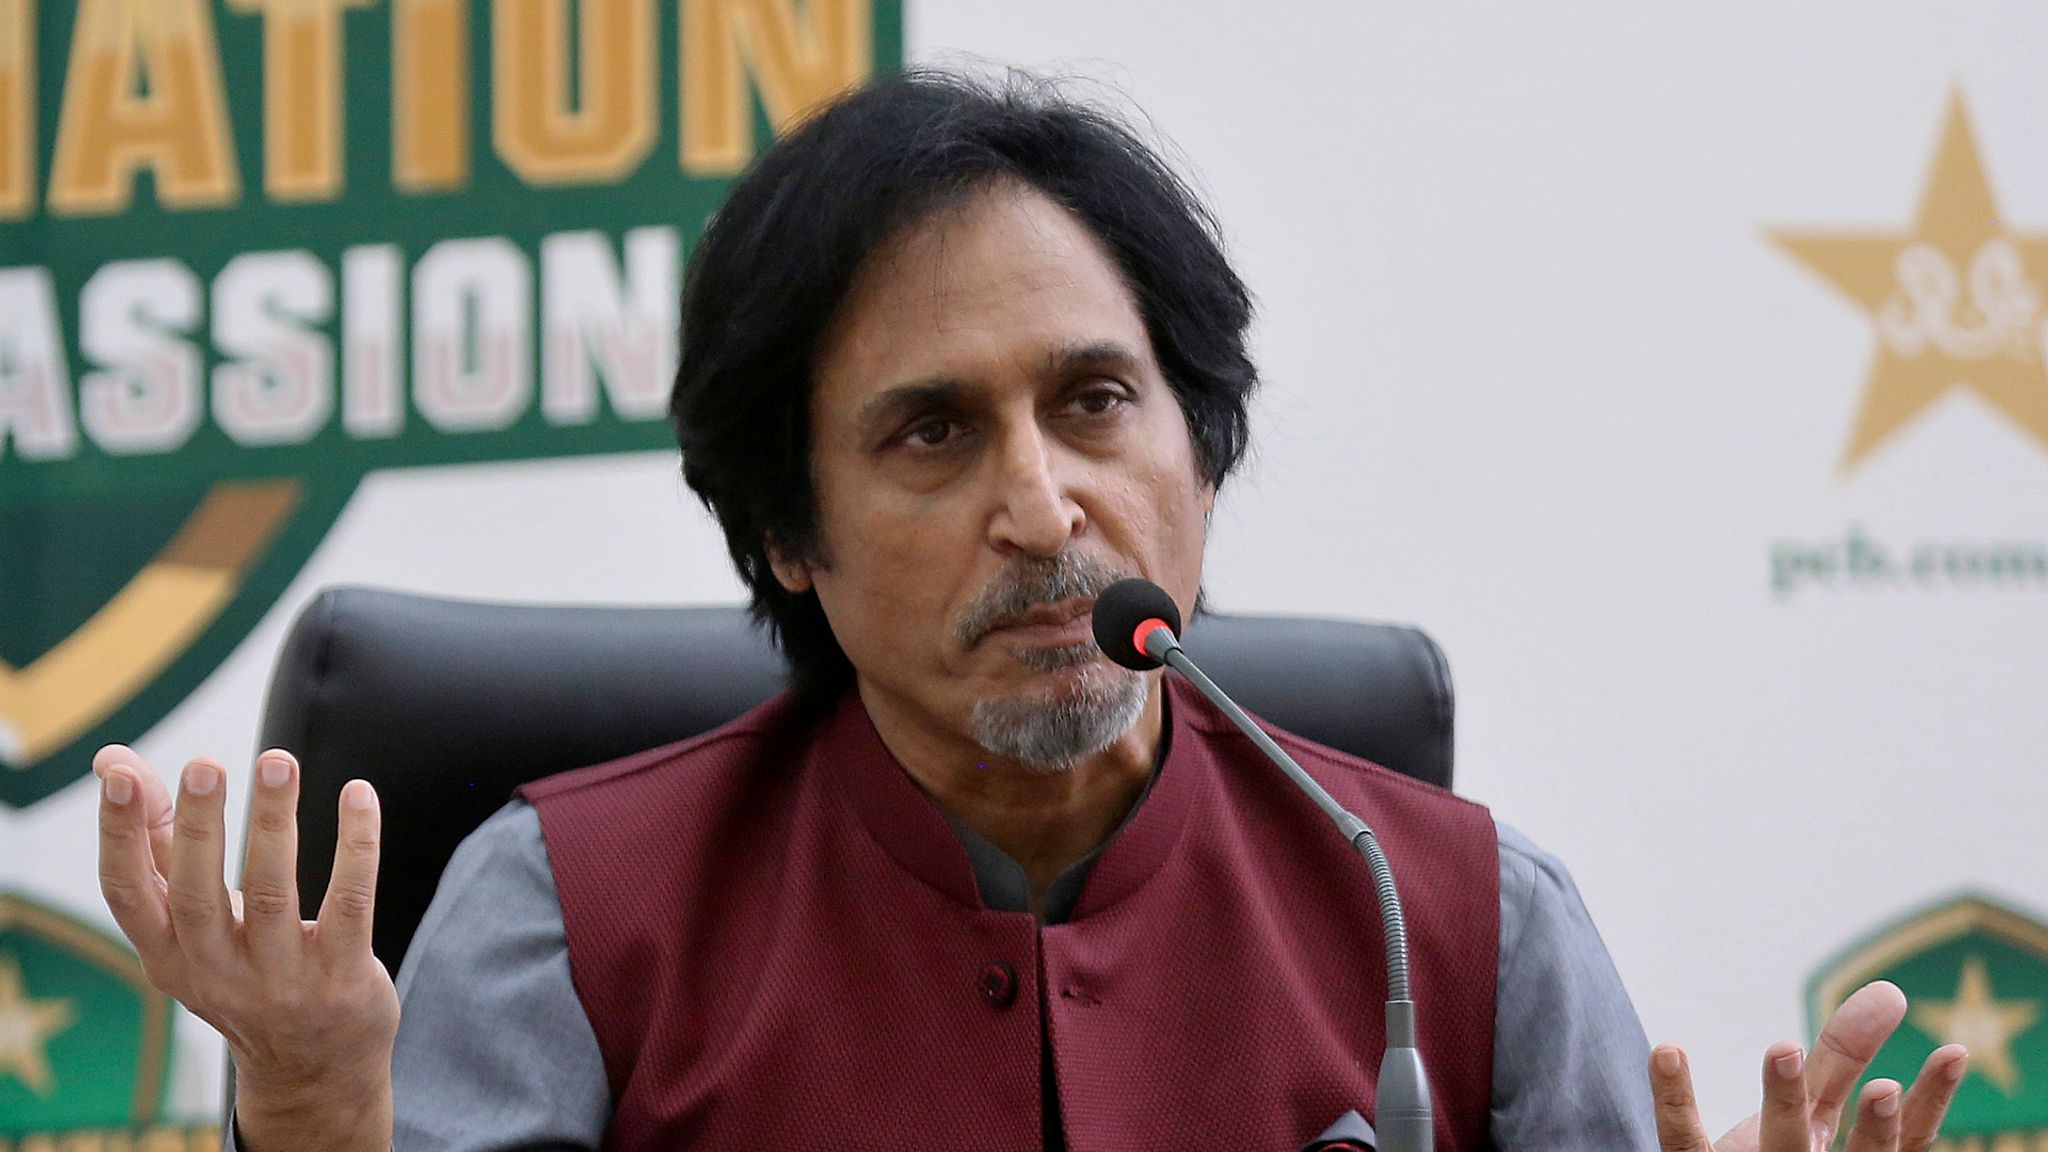 IPL 2022: Ramiz Raja clears air on “We’ll see who goes to play IPL over PSL” comment, claims ‘I was MISQUOTED’